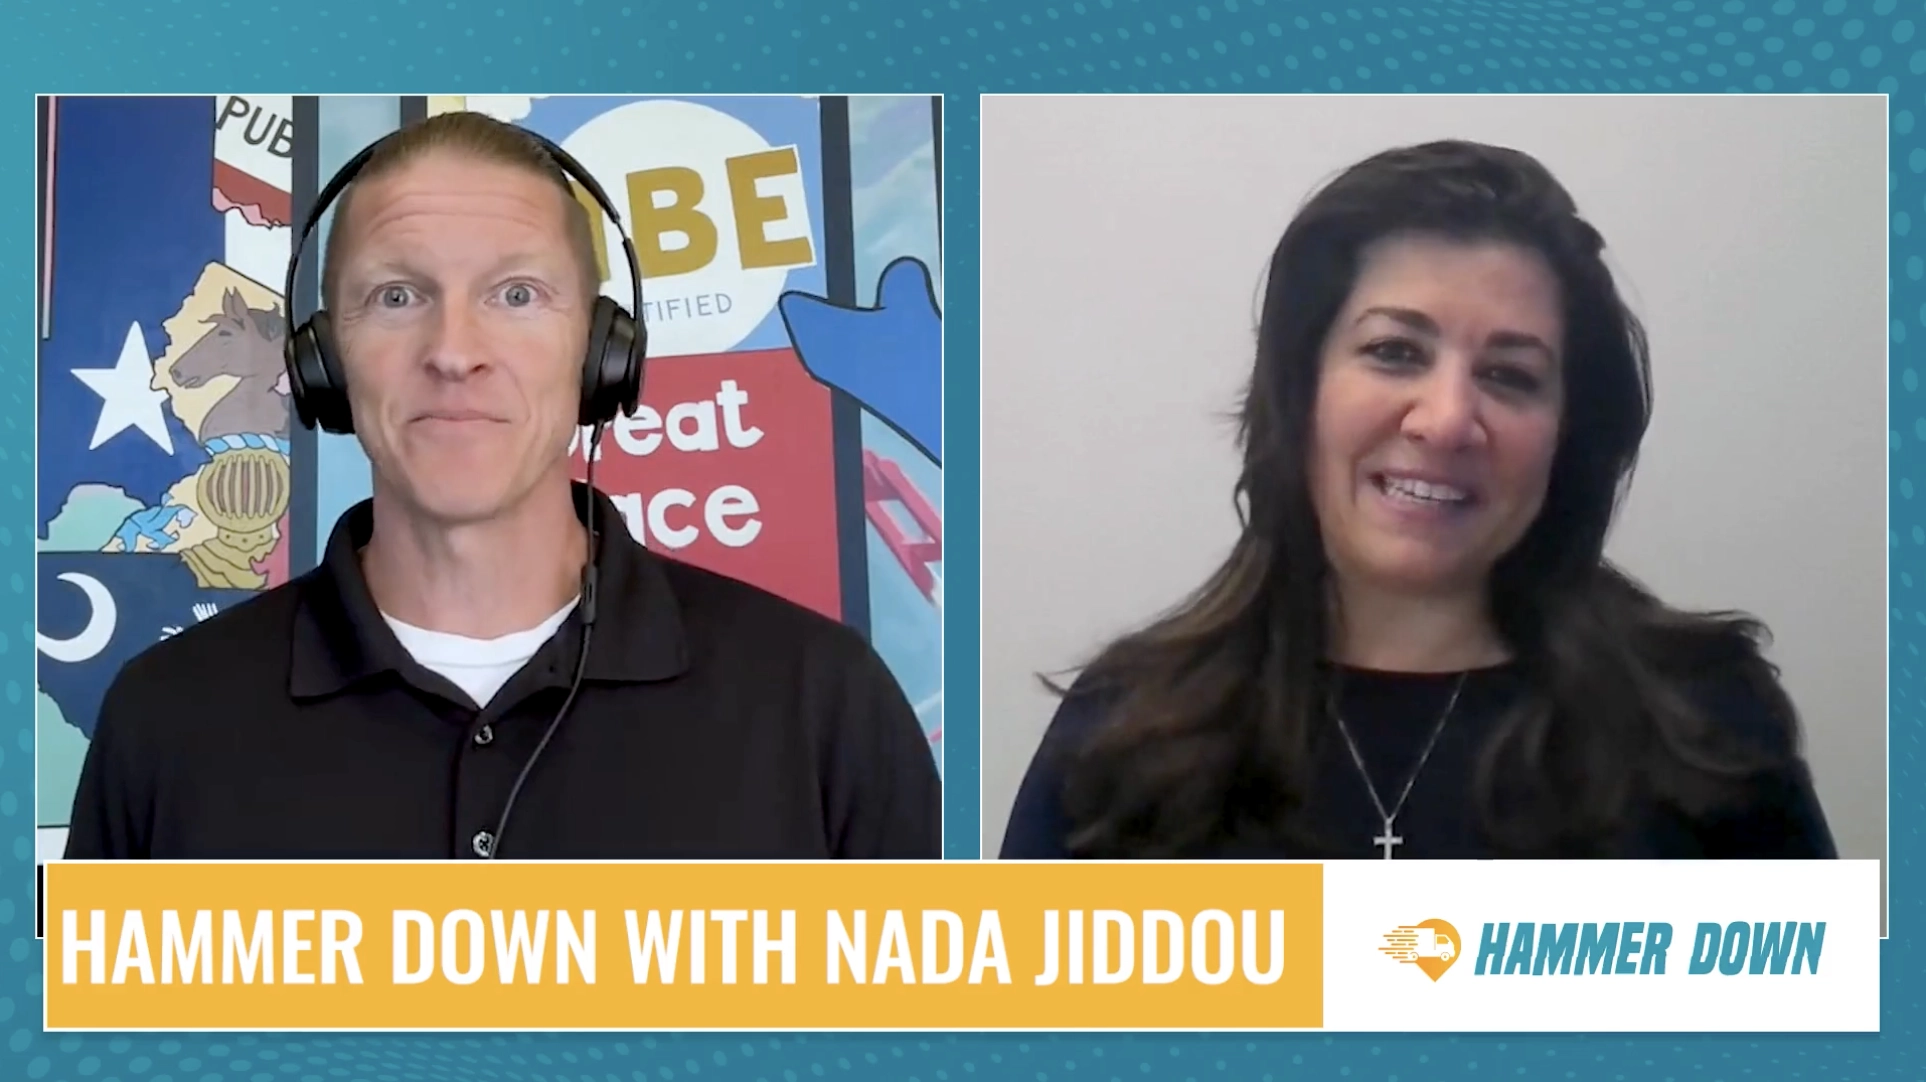 Revolutionizing Transportation Safety and Telematics with Nada Jiddou and Hammer Down: The Clarience Technologies Approach